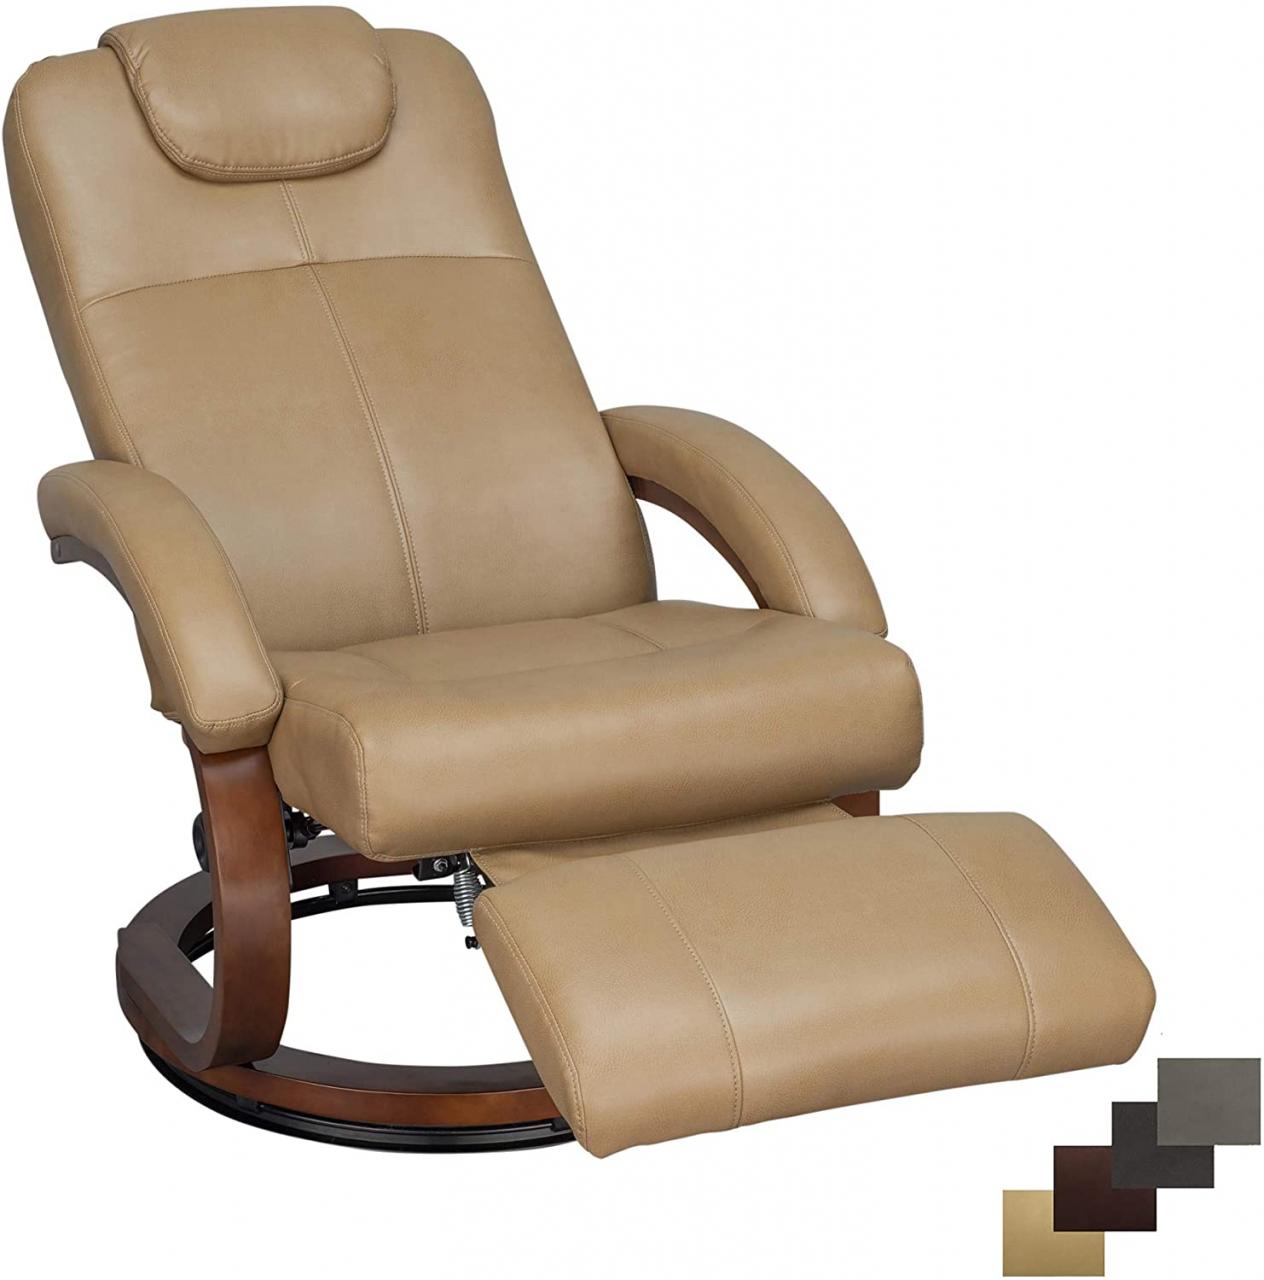 Buy RecPro Charles 28 RV Euro Chair Recliner Modern Design RV Furniture RV  Recliner (1 Chair, Toffee) Online in Indonesia. B084655D2Y